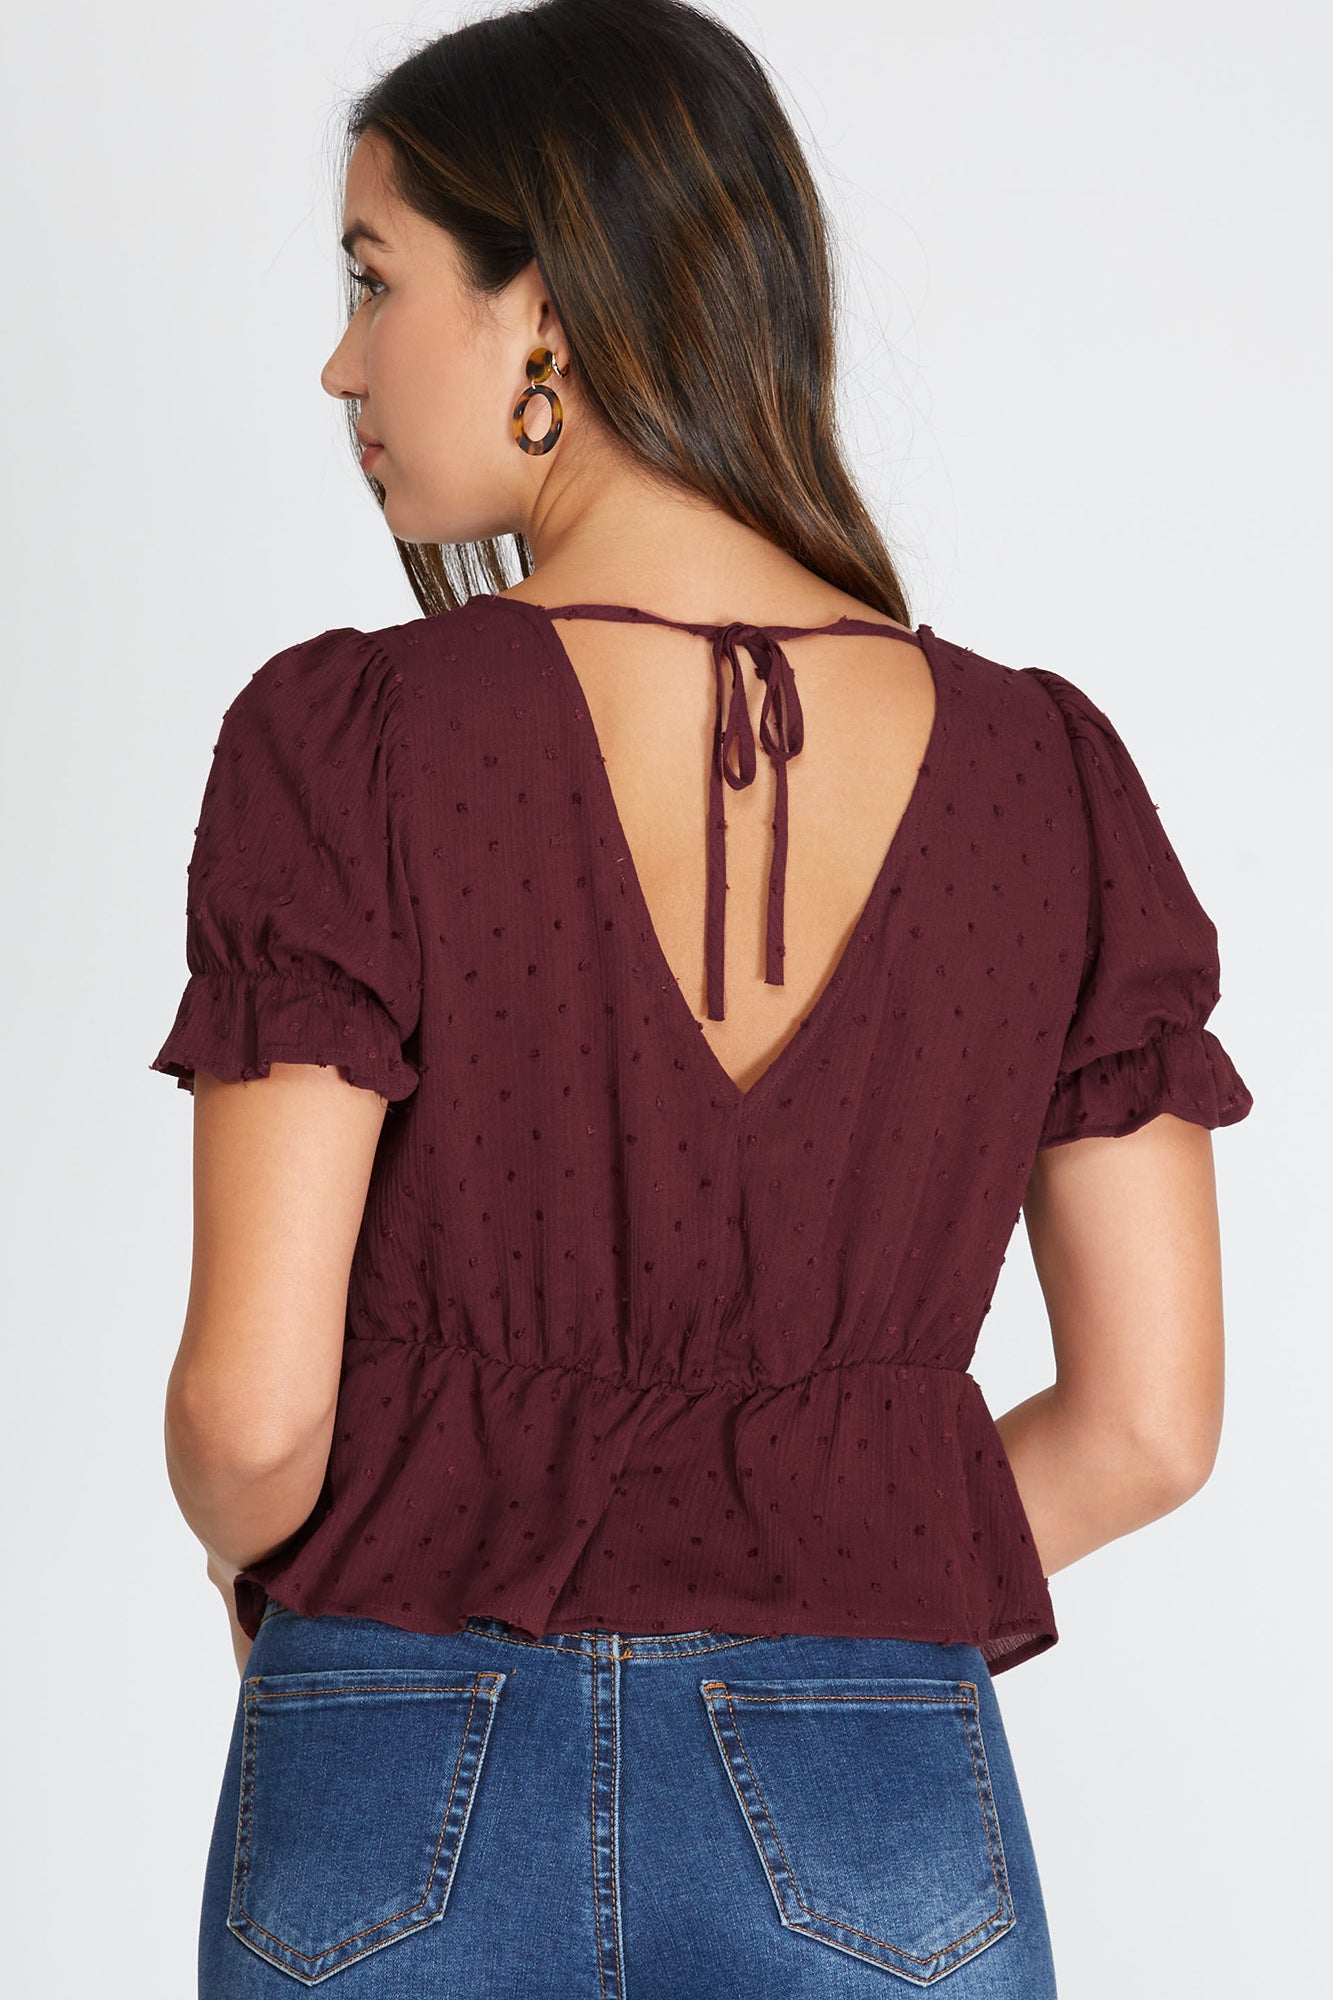 Charmer Baby Doll Top in Wine